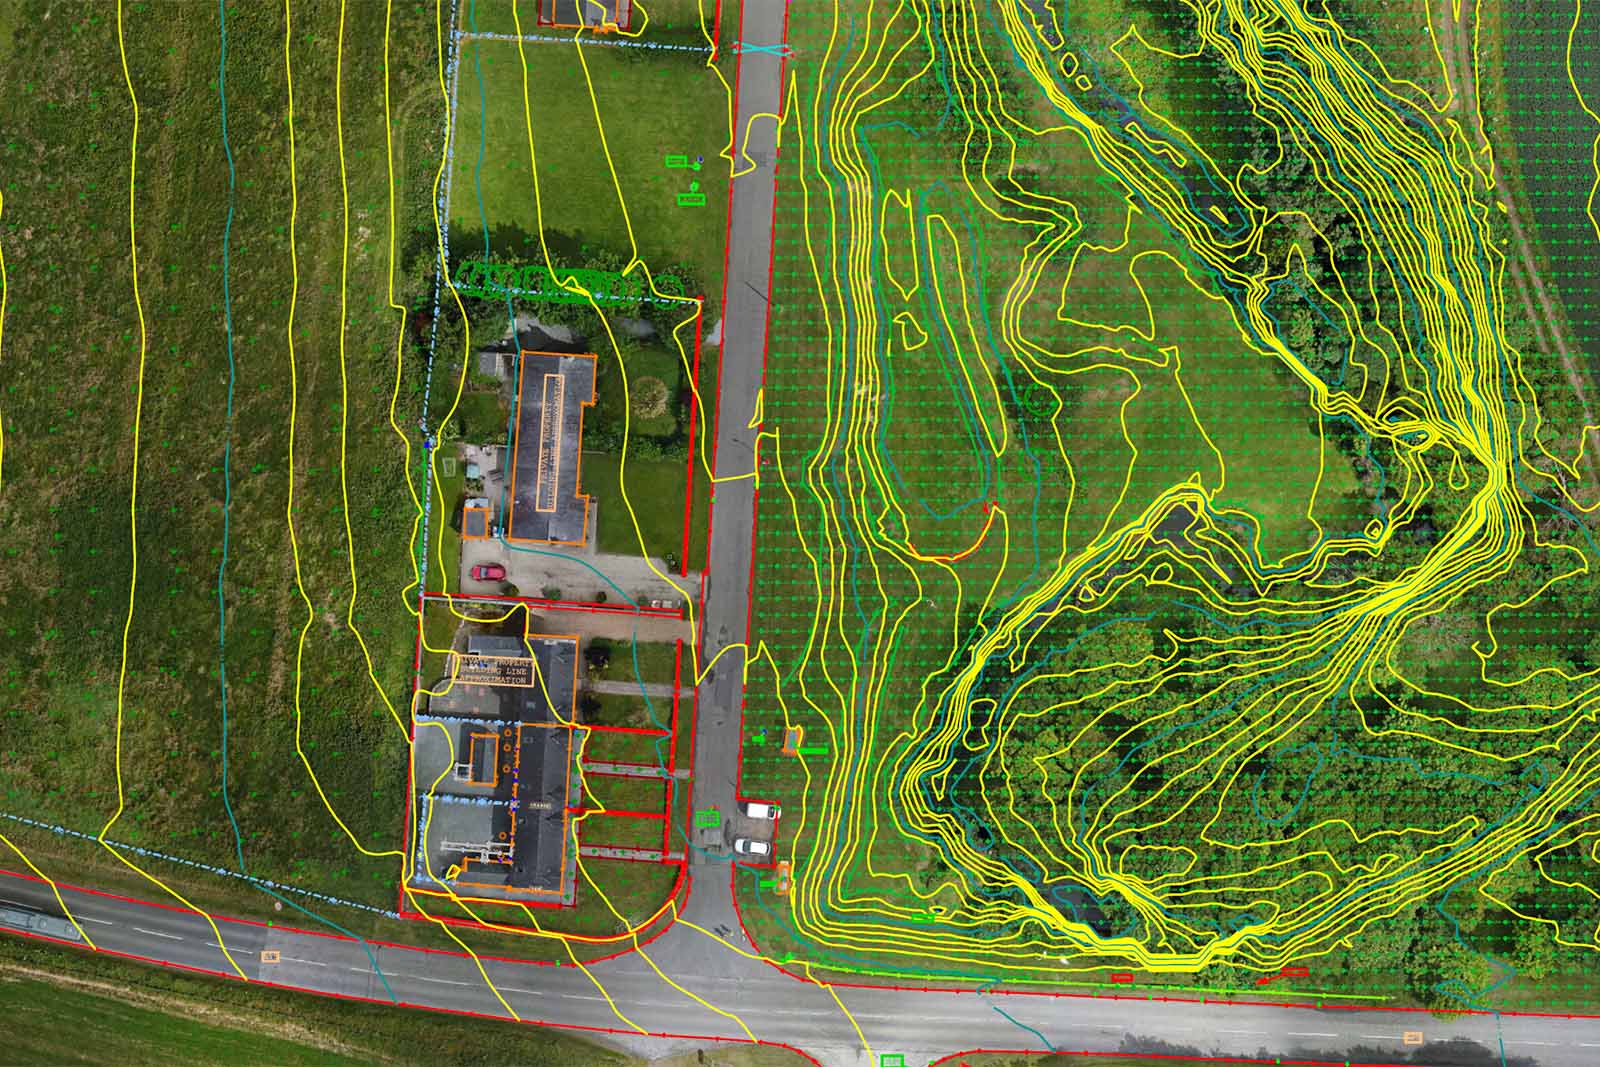 a land survey taken by a drone using photography with topography lines